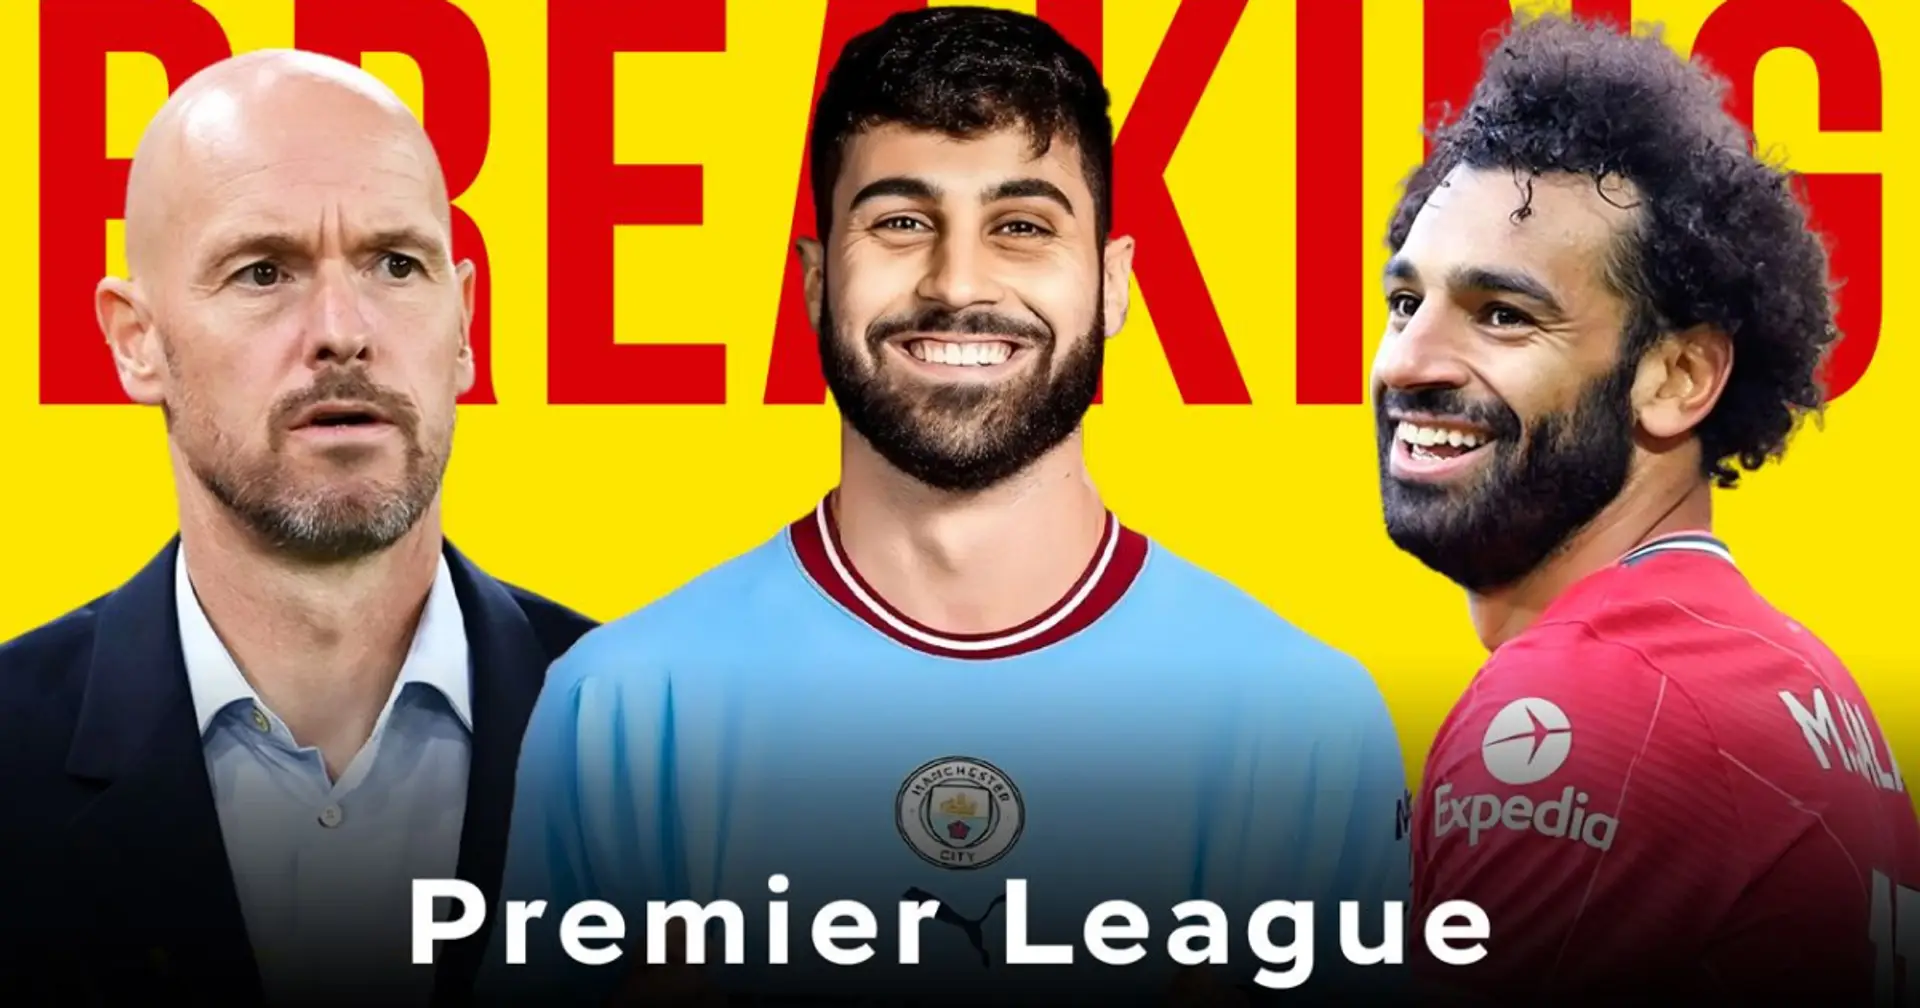 Premier League News: Salah makes Saudi decision, City's world-record transfer & United to sell 11 players (video)